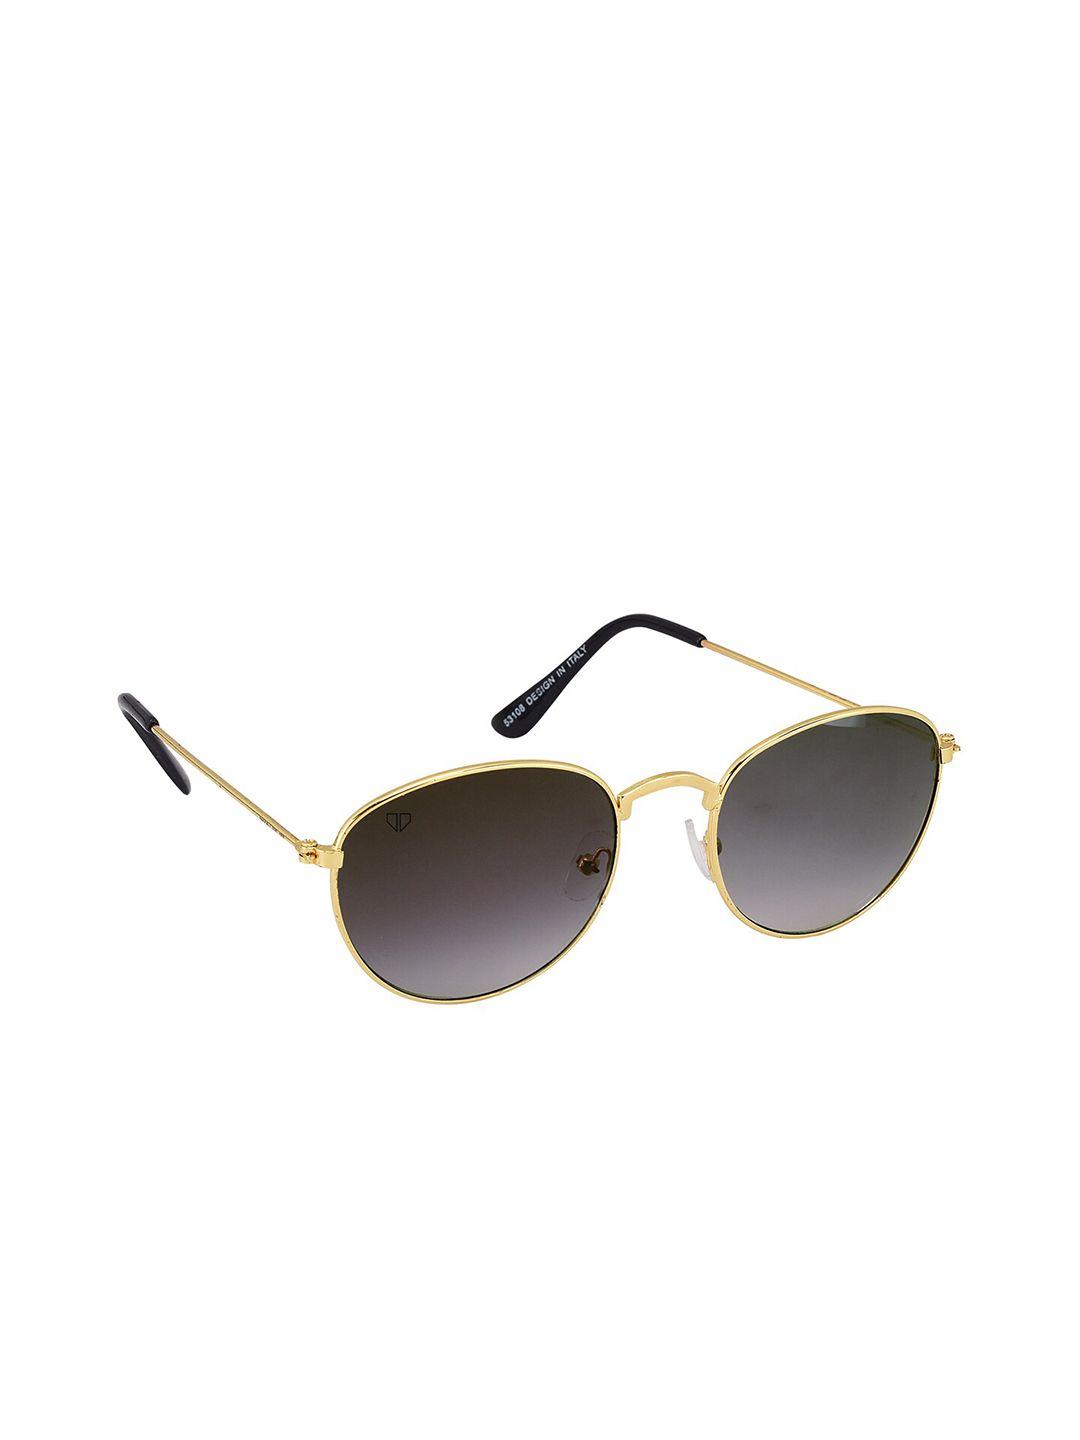 walrus men black lens & gold-toned oval sunglasses with uv protected lens